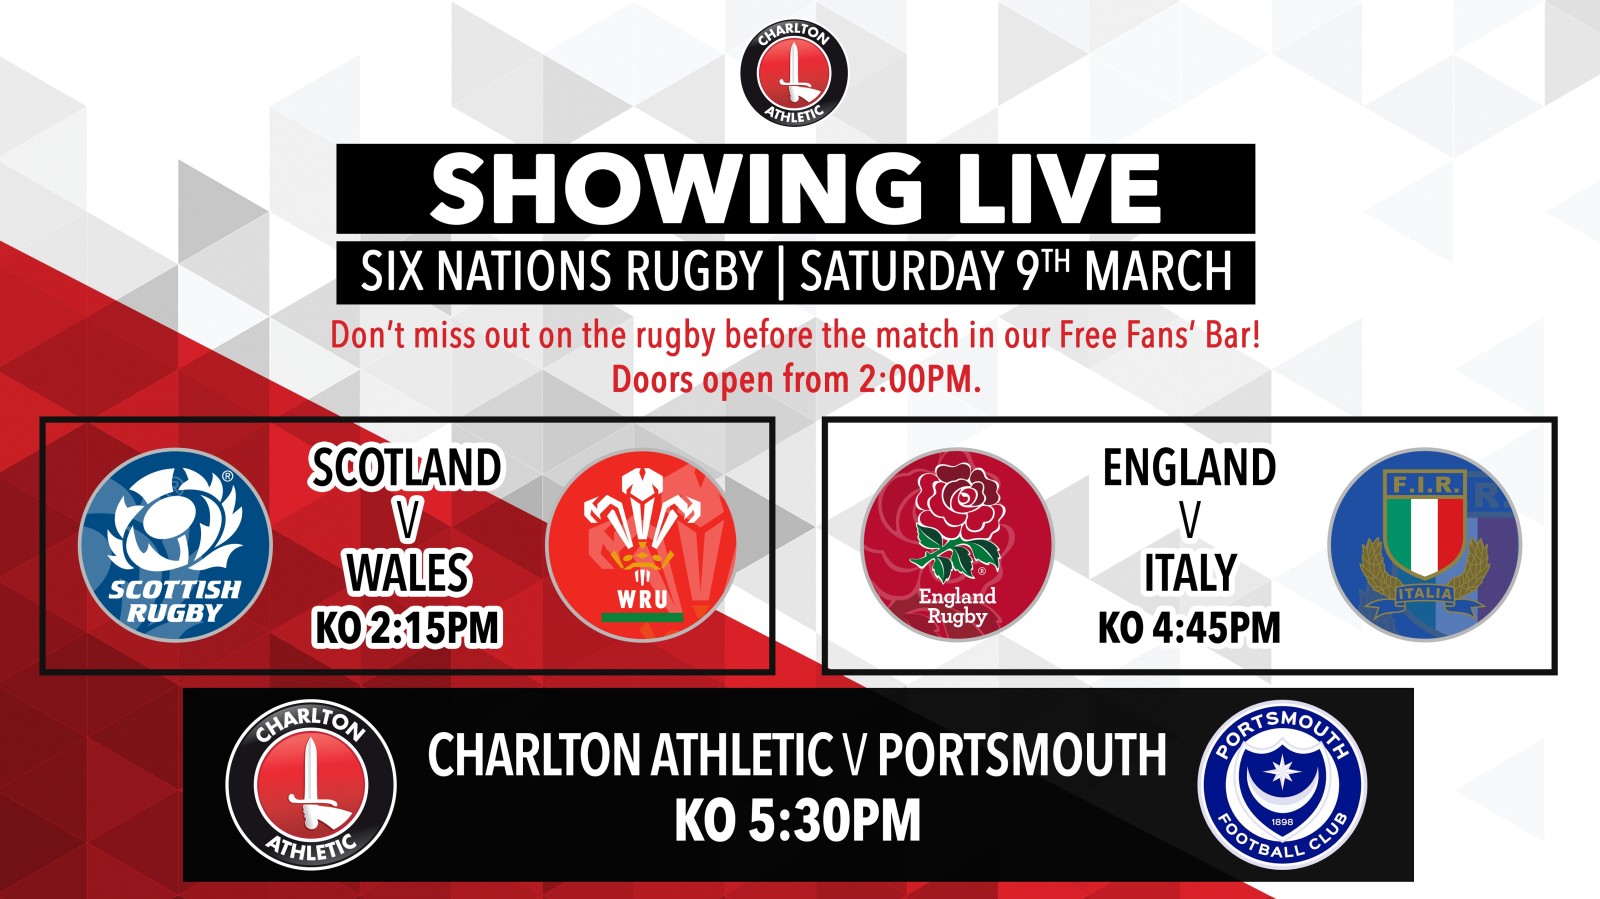 Watch the rugby in the Fans Bar before tomorrows Portsmouth game Charlton Athletic Football Club